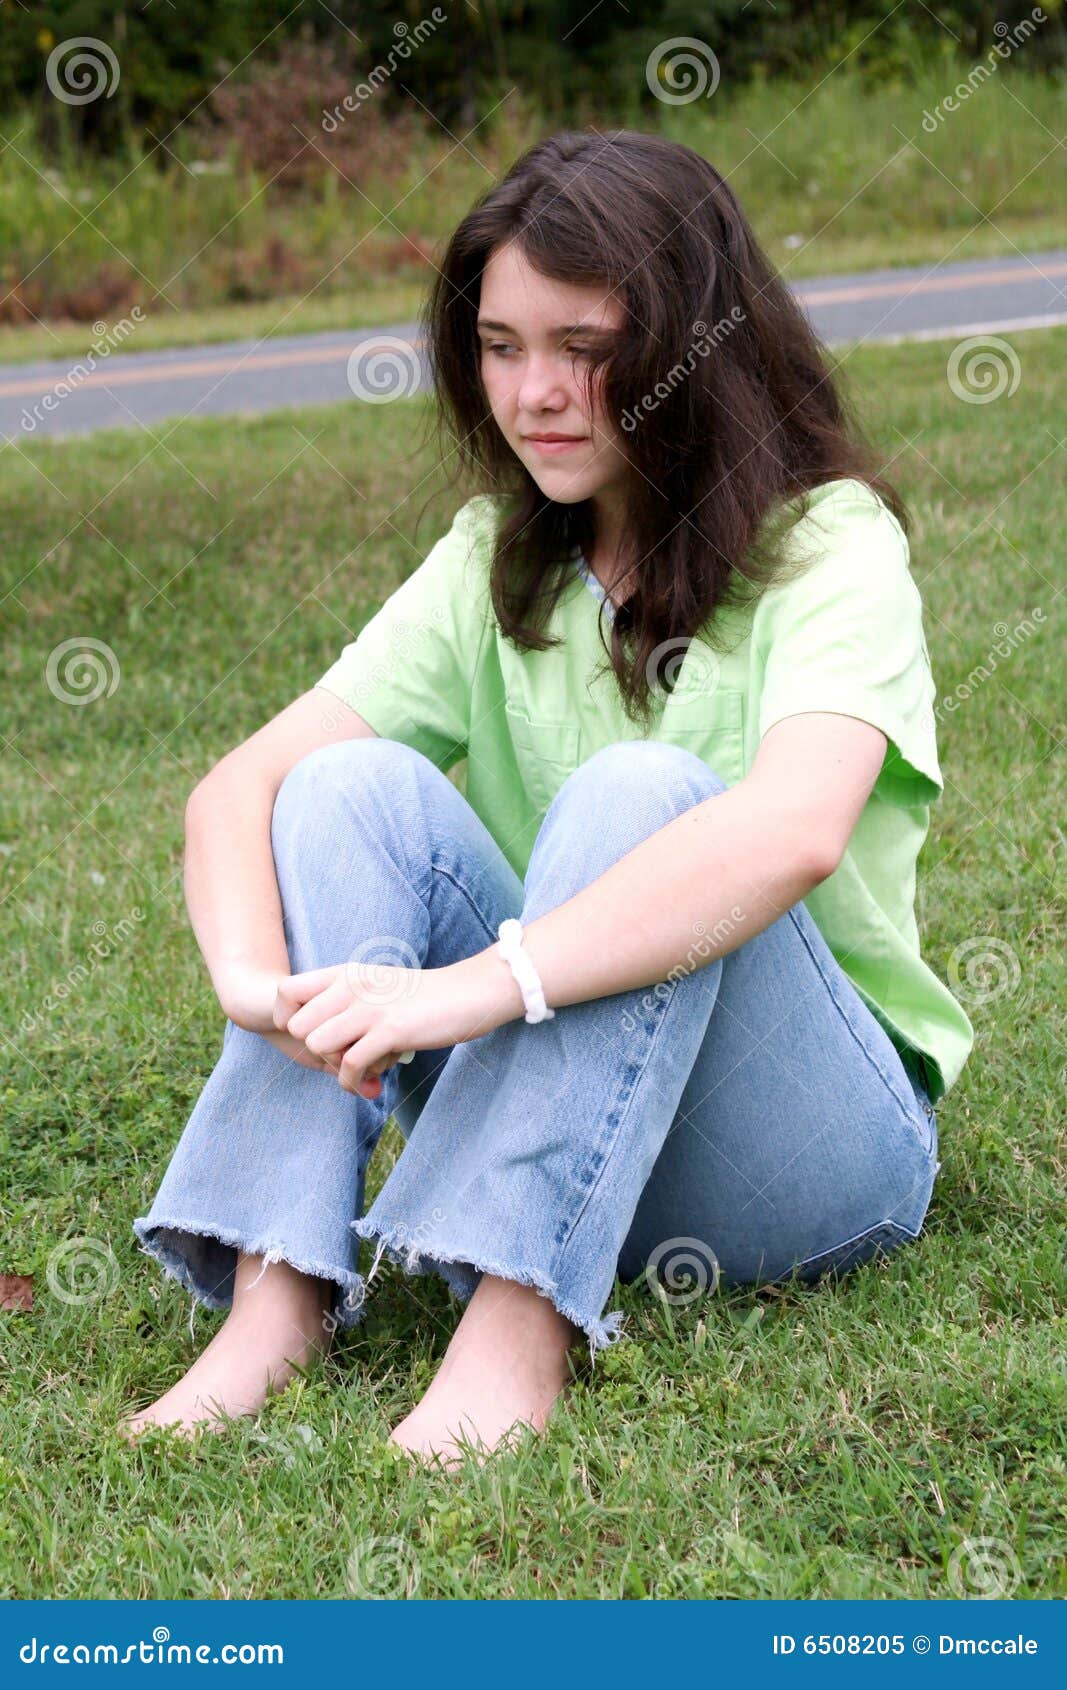 Teen Girl In Grass 2 Royalty Free Stock Photo - Image: 6508205